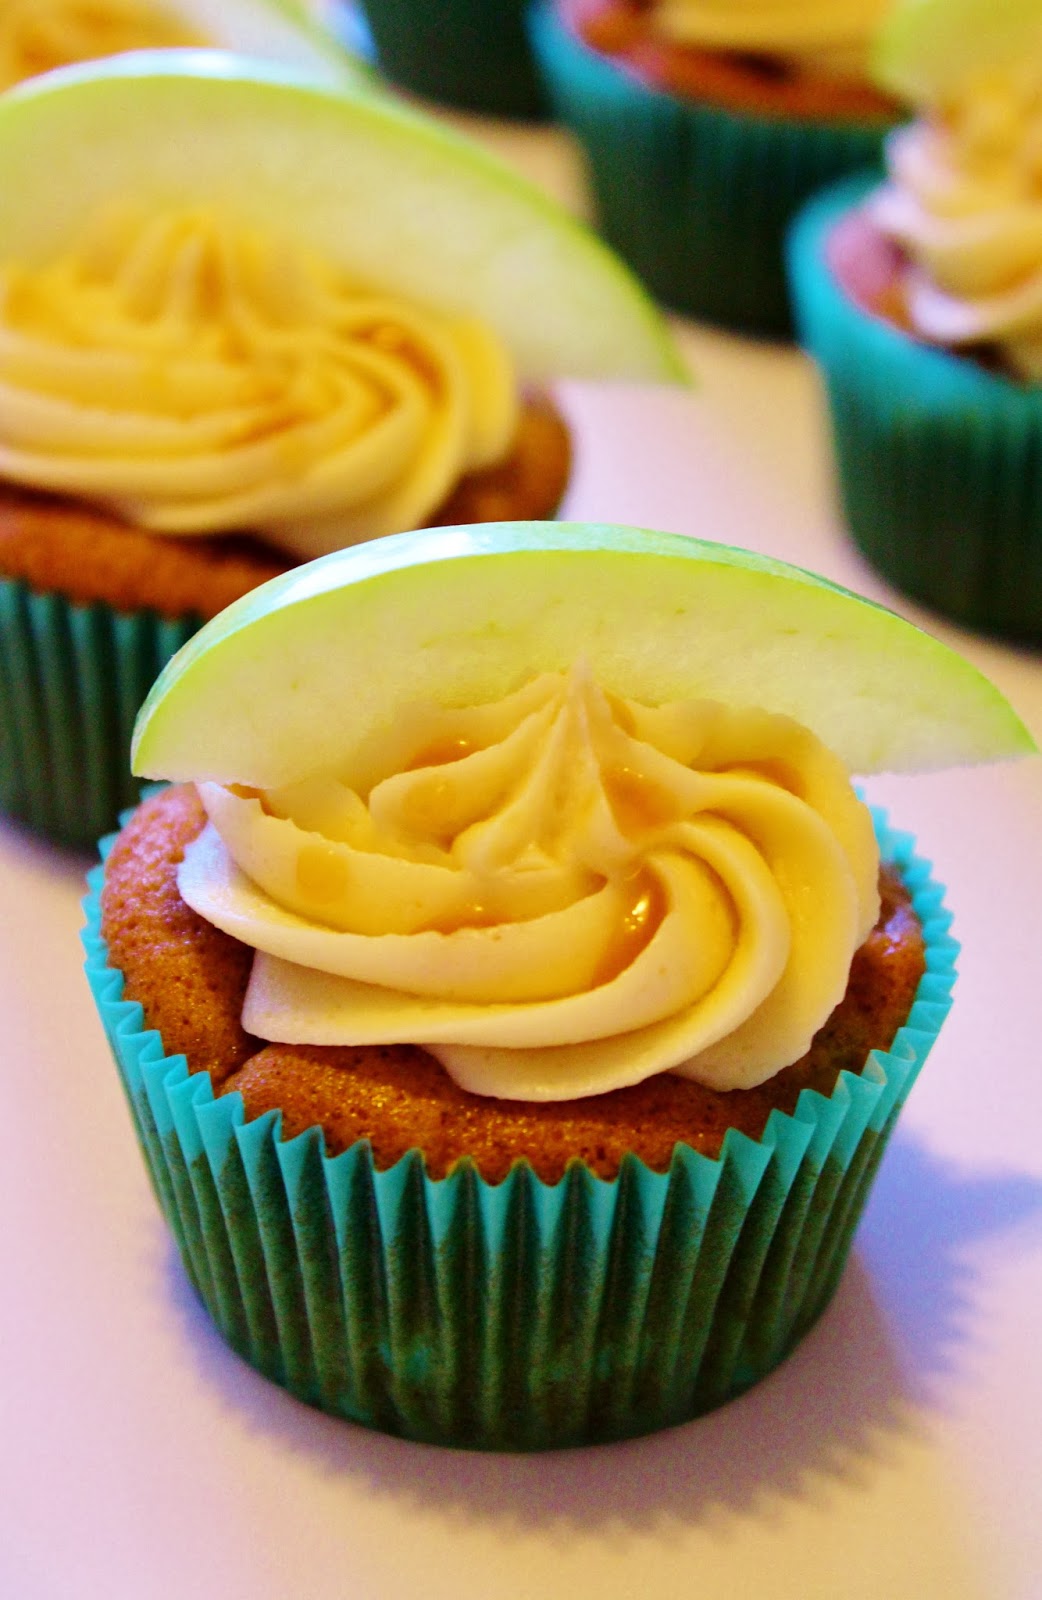 Blog as you Bake: Apple Spice Cupcakes with Salted Caramel Buttercream